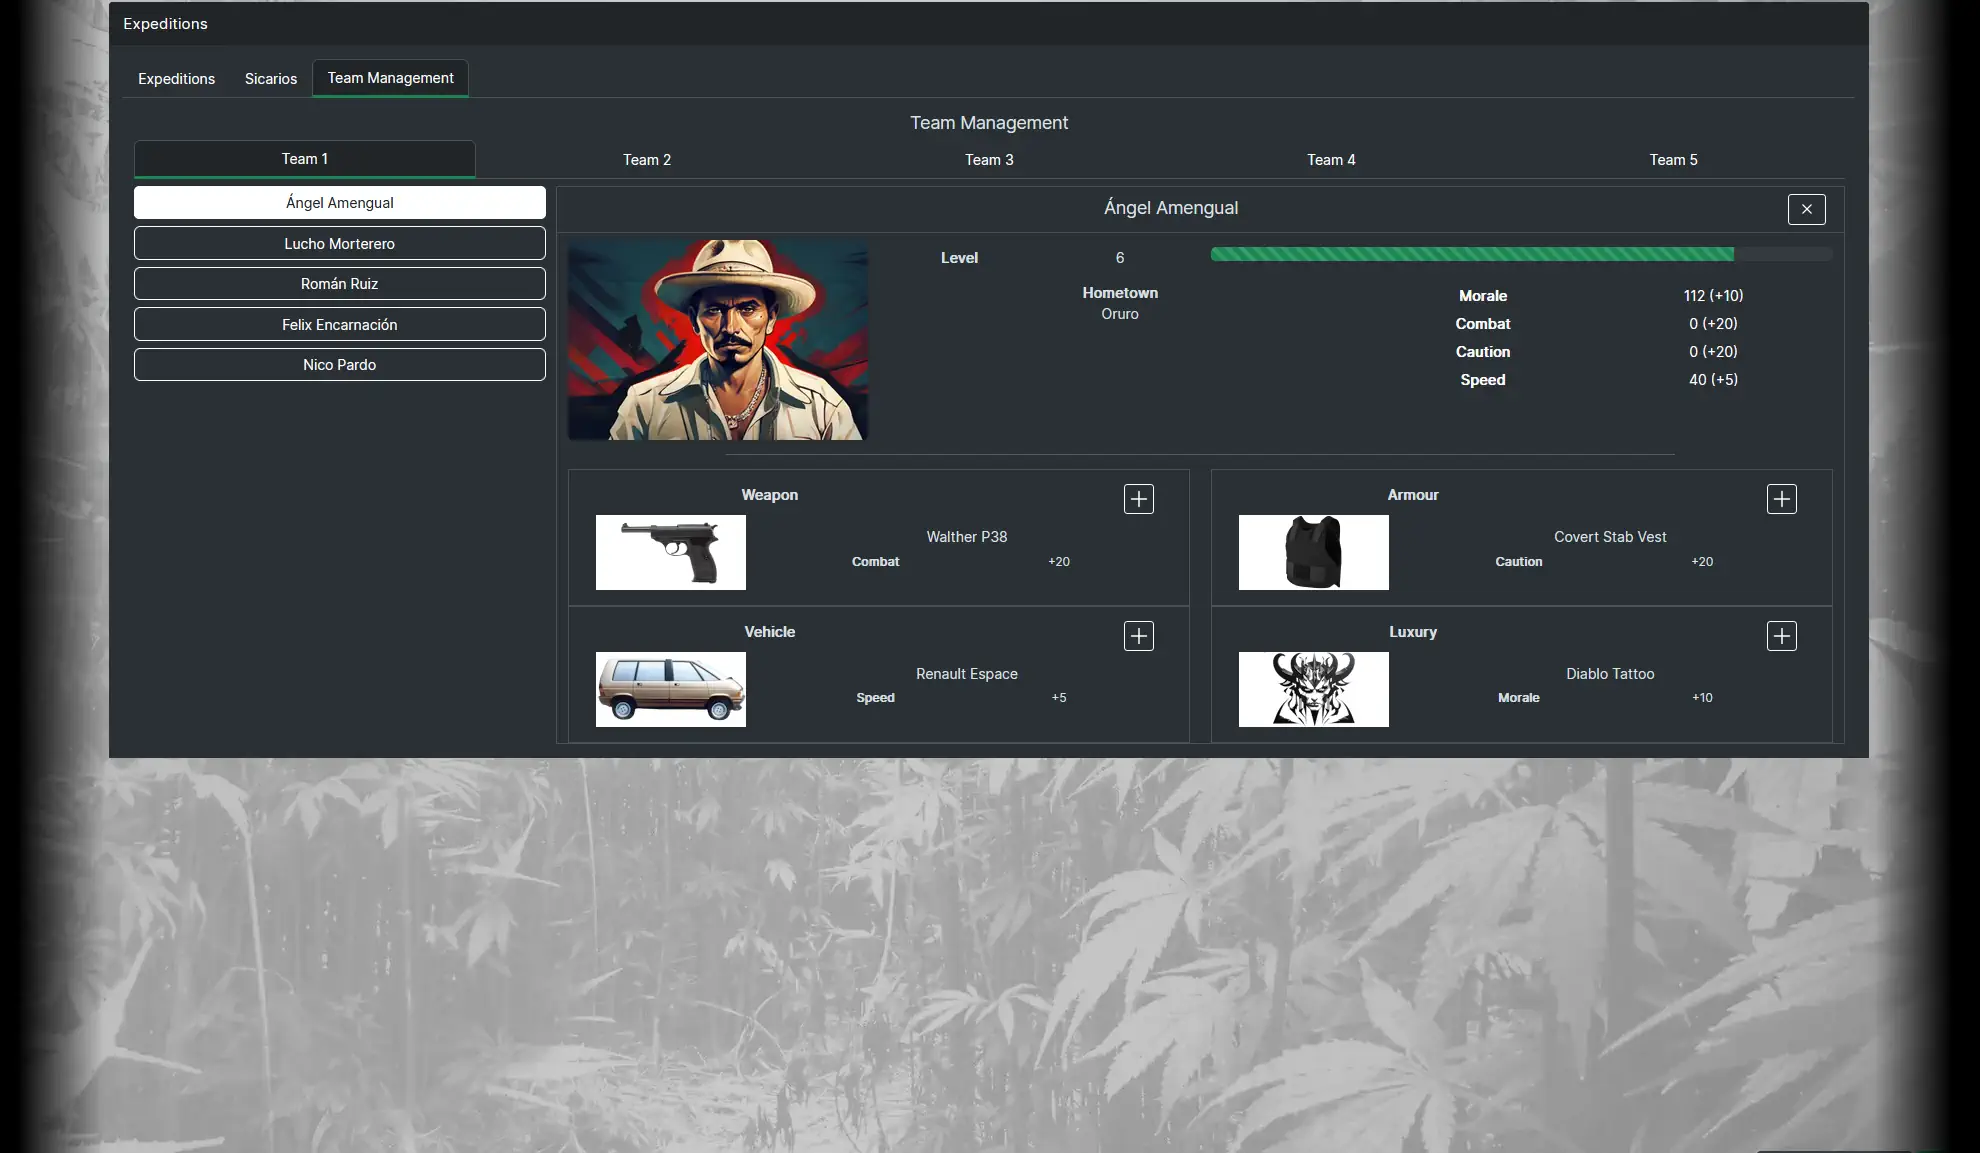 An image showing the Team Management tab of the Expeditions feature